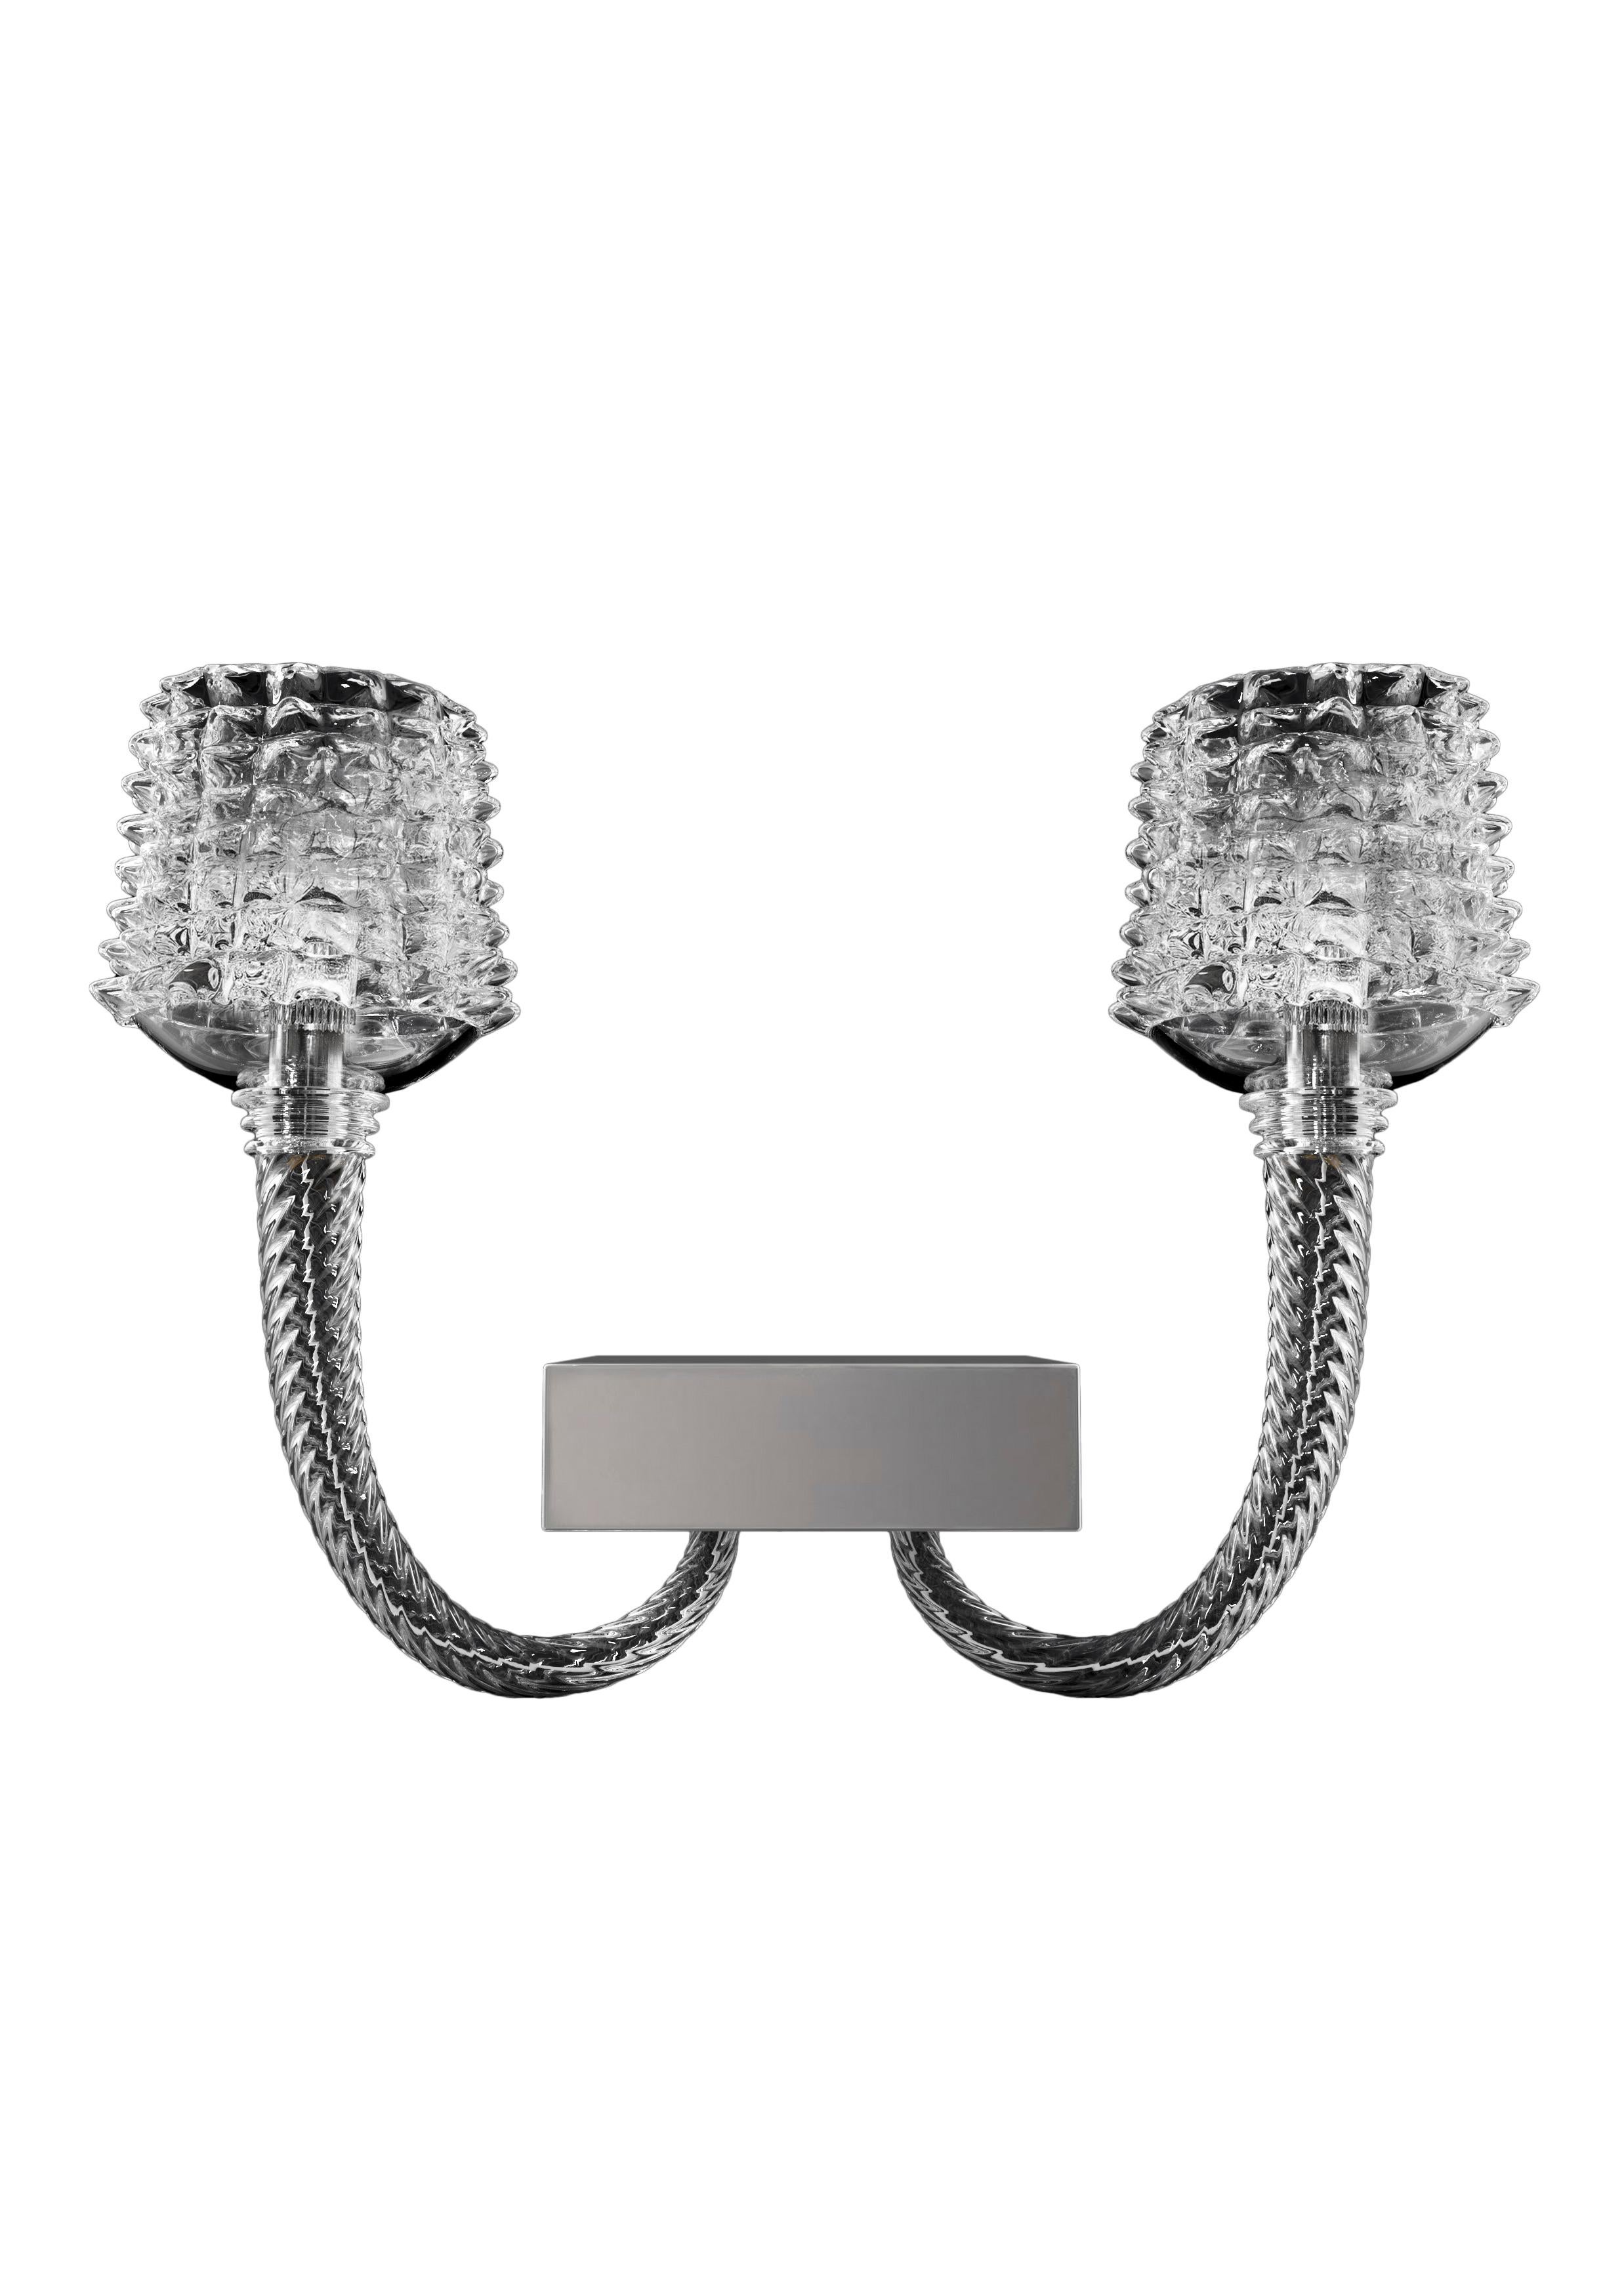 Clear (Crystal_CC) Florian 5717 02 Wall Sconce in Glass with Polished Chrome Finish, by Barovier